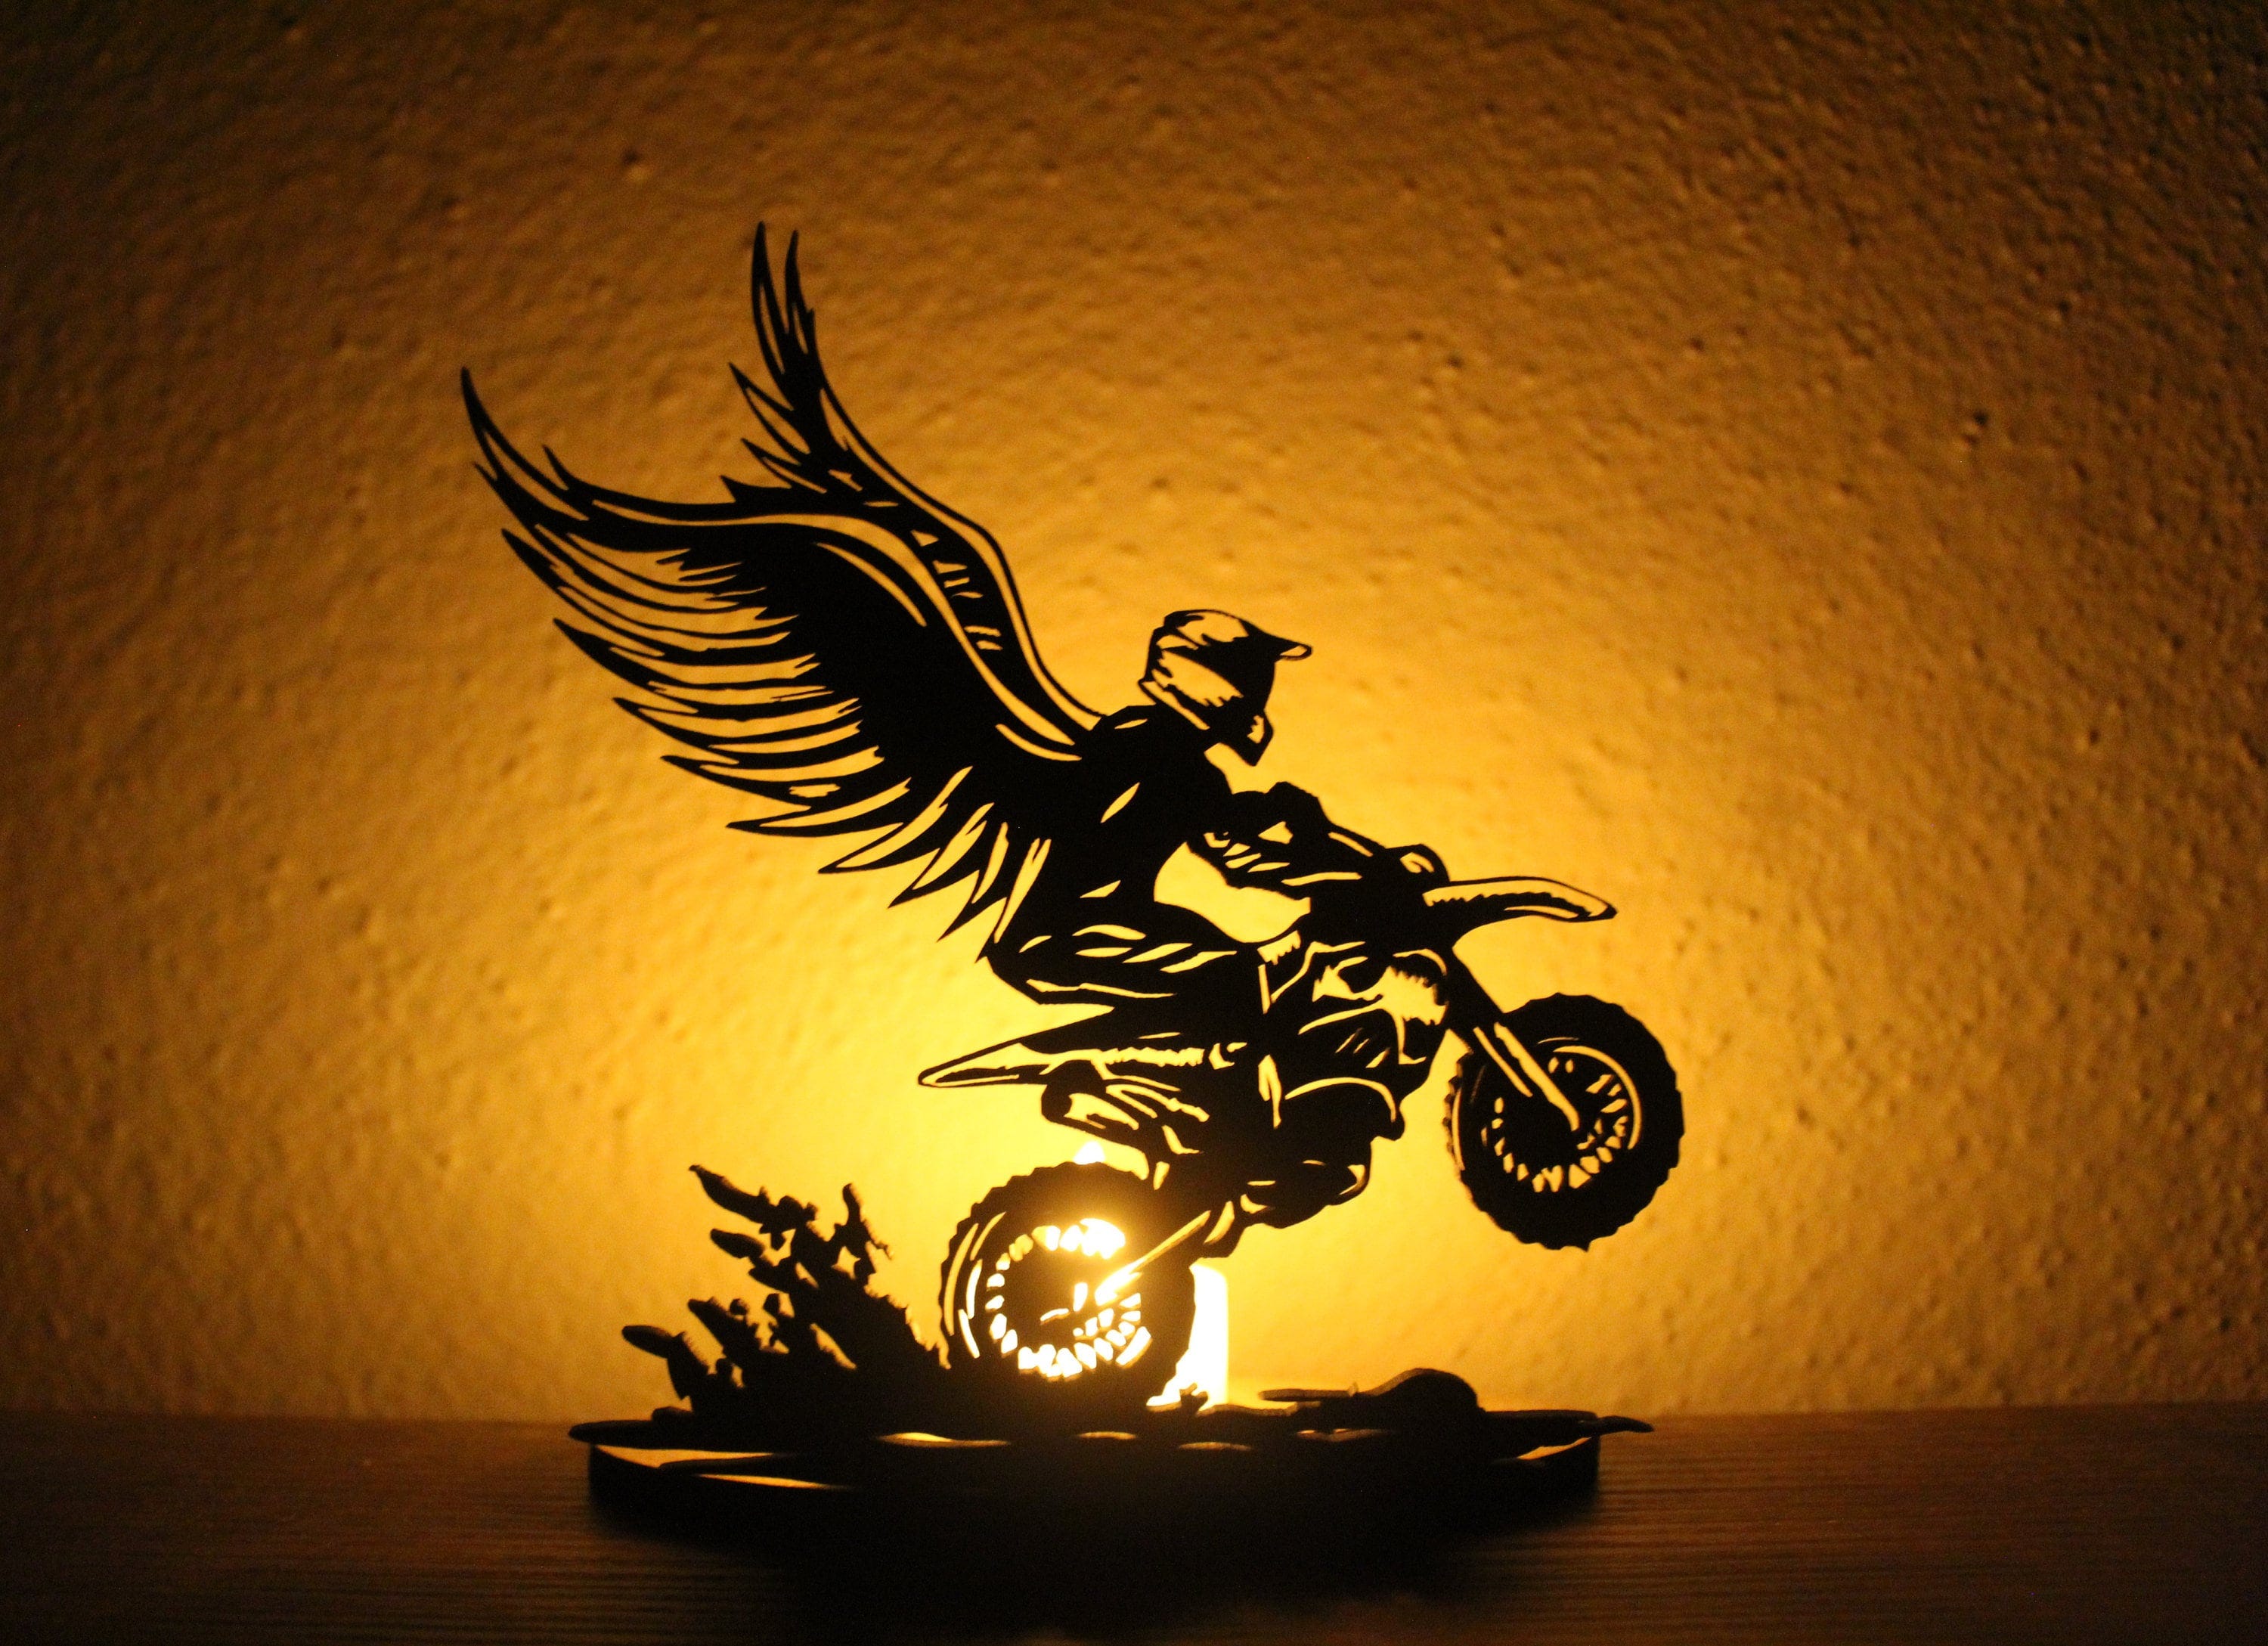 Motorcycle Candle Holder, Digital Lantern Files for Laser Cutting, Cnc Cutting, and Diy Projects, DXF, SVG, EPS, Ai format, Light Shadow Box